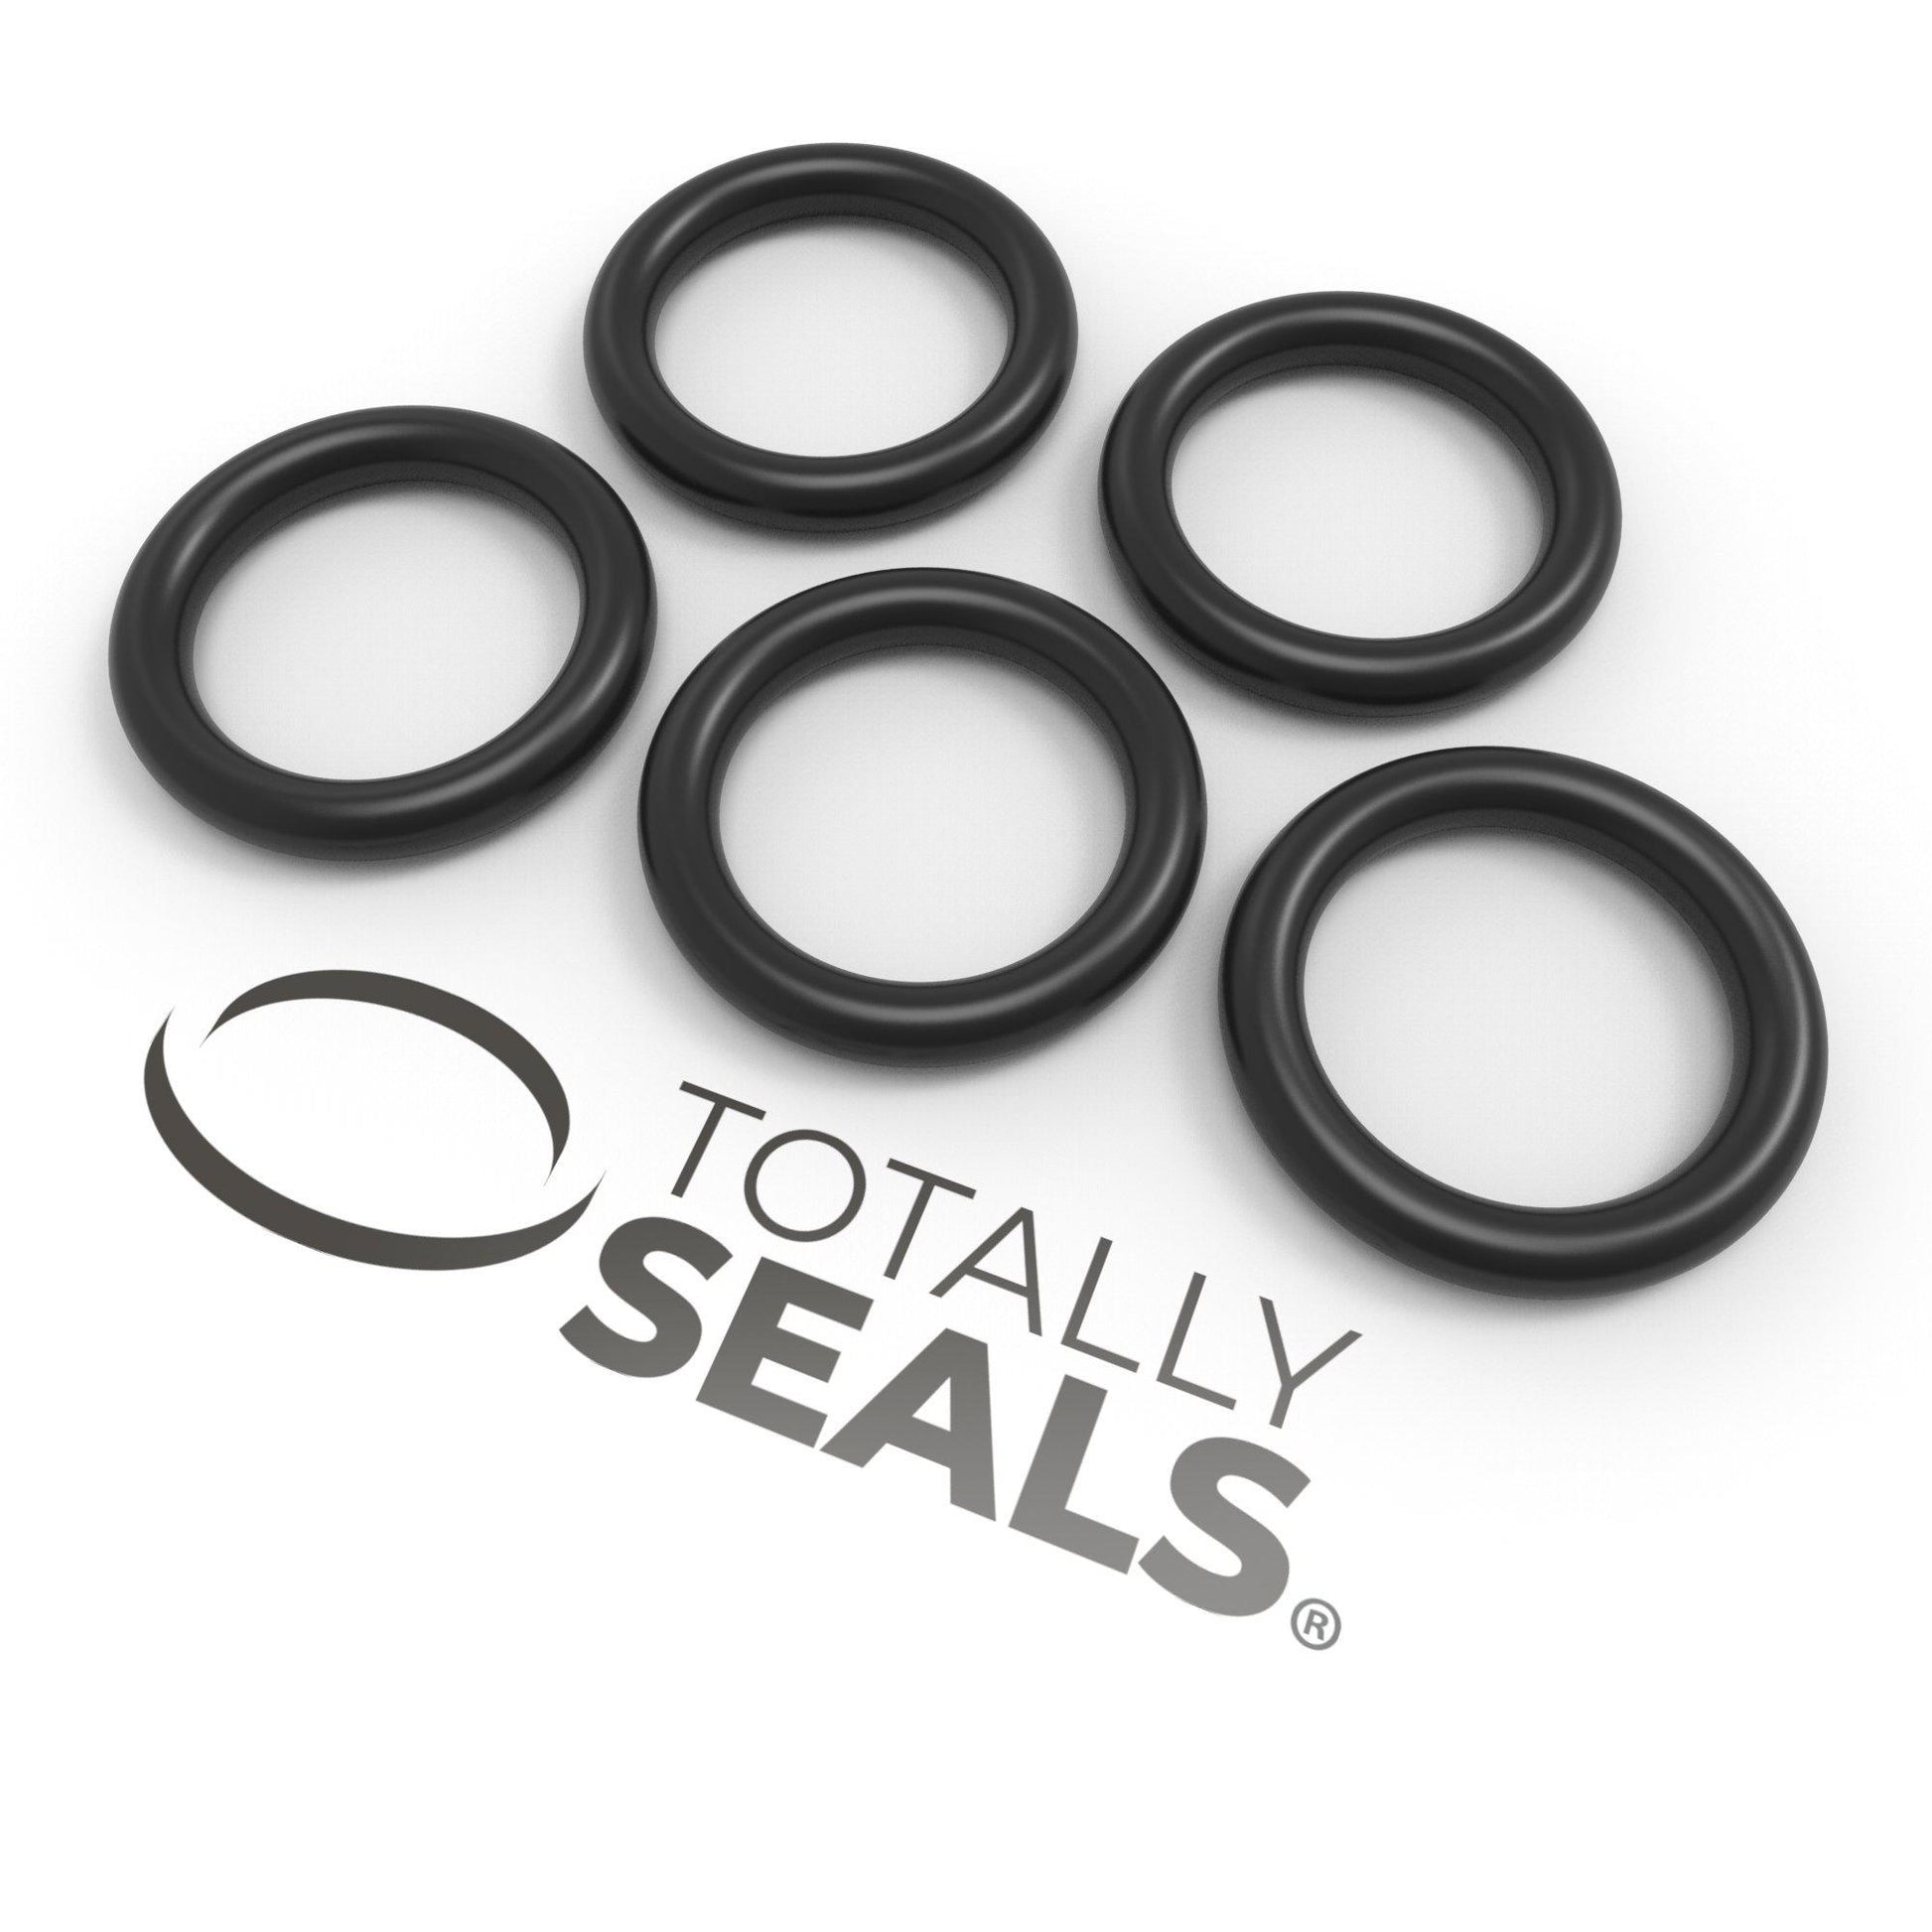 39mm x 2mm (43mm OD) Nitrile O-Rings - Totally Seals®